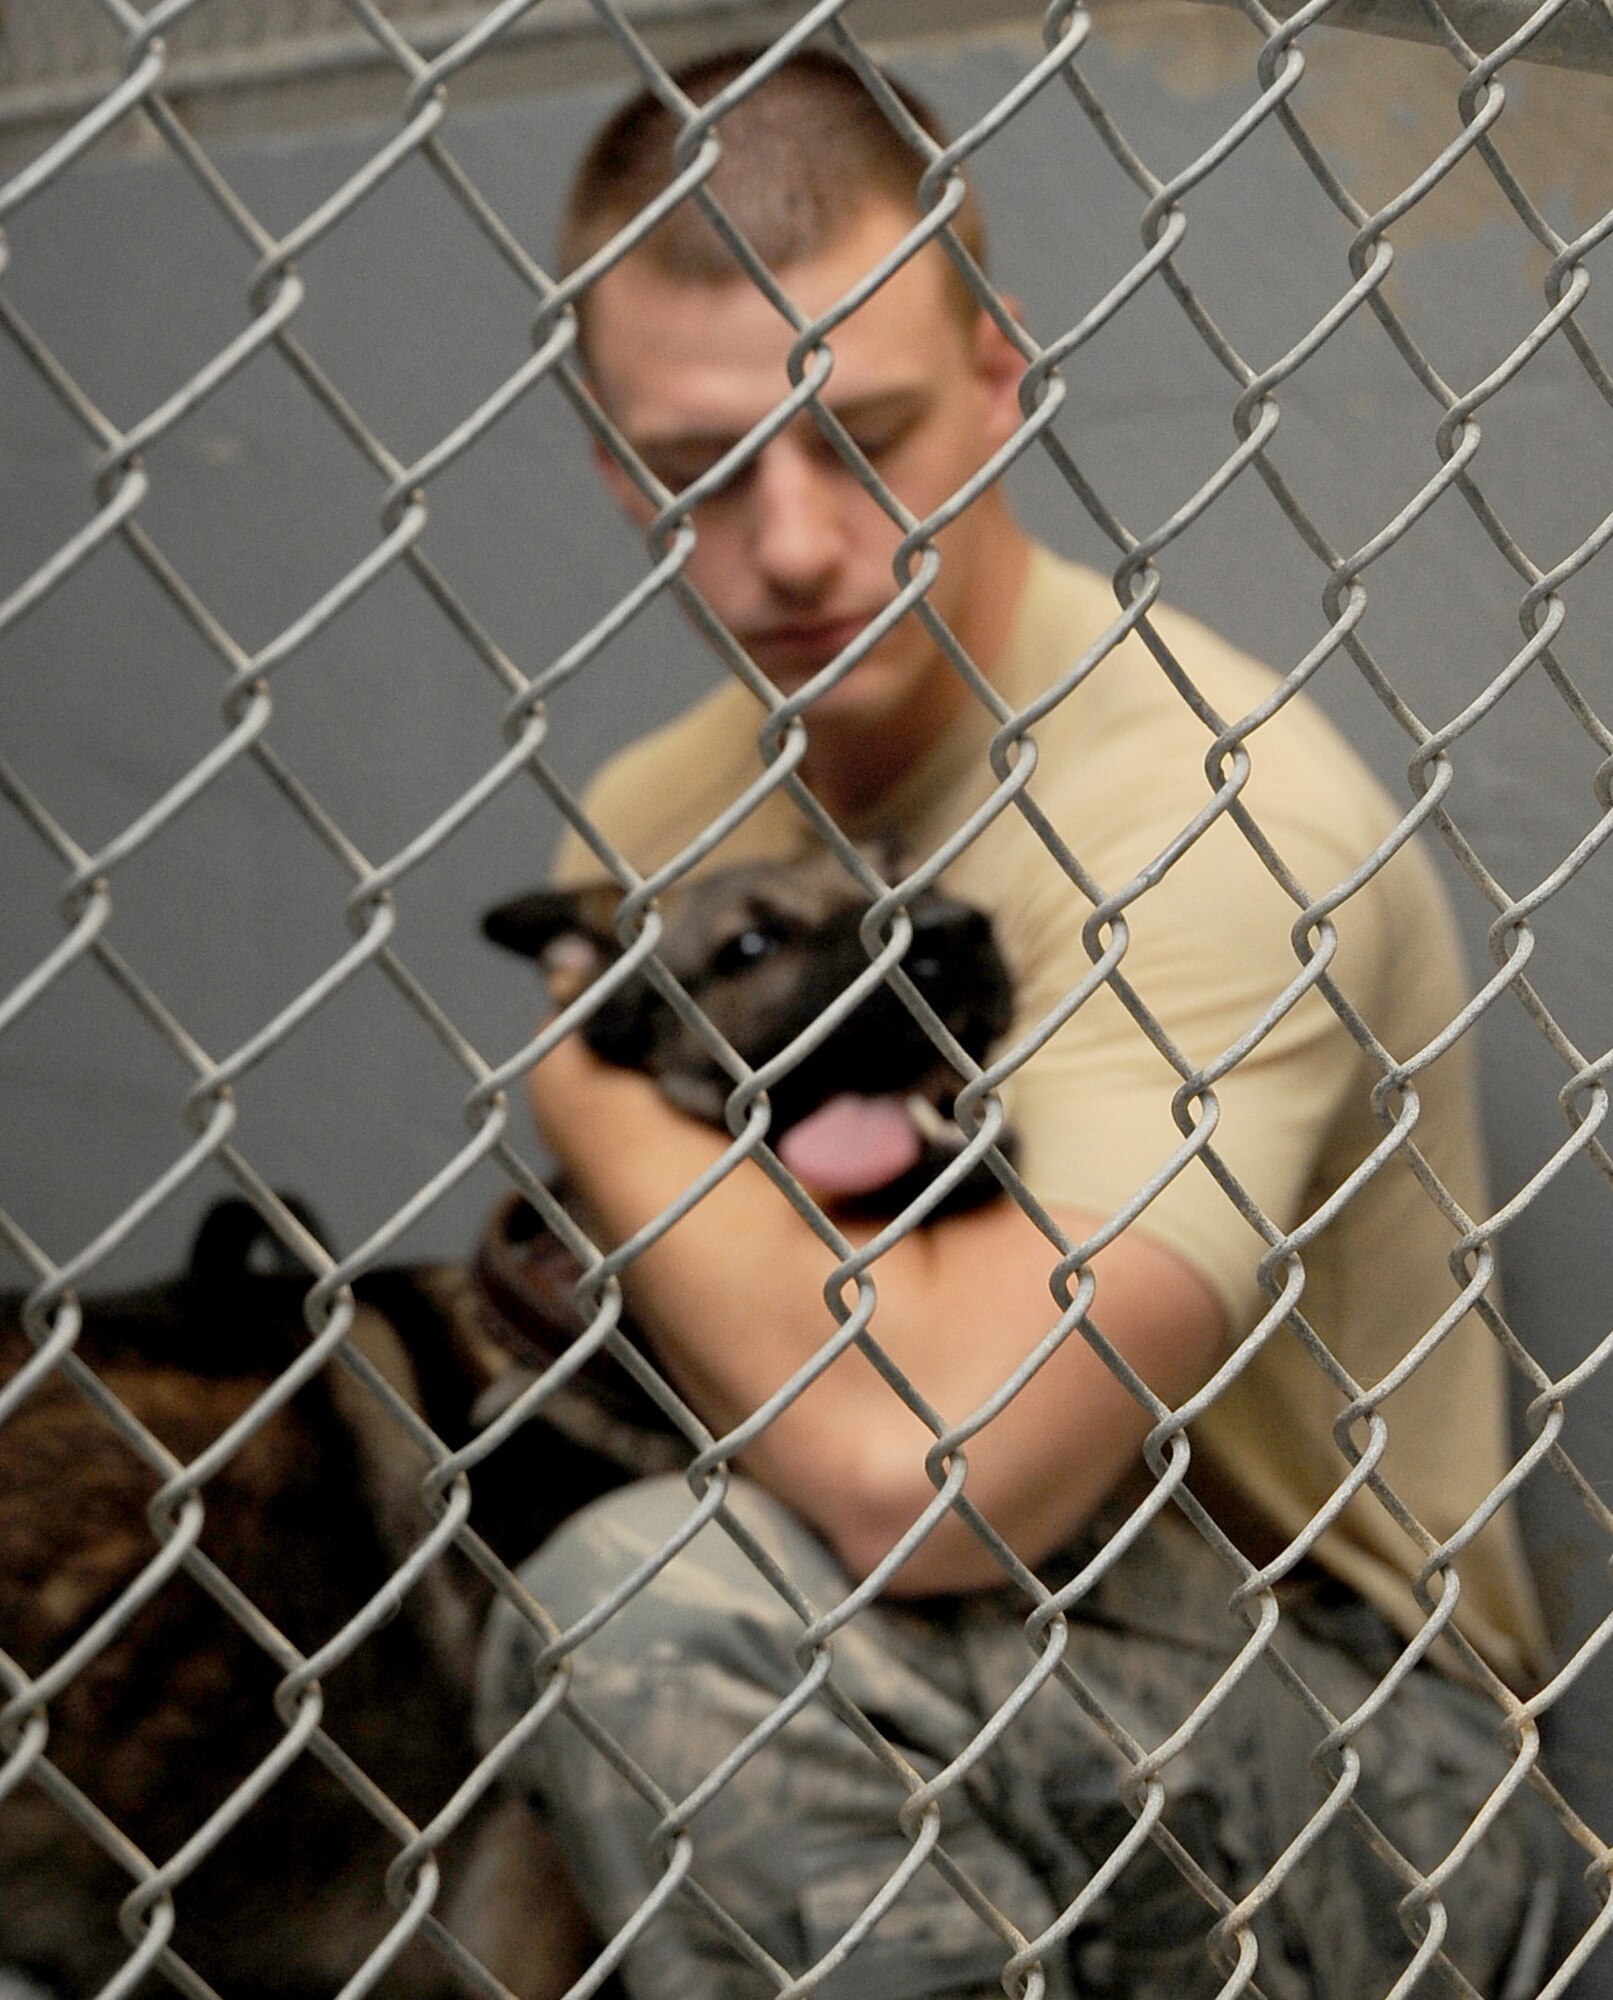 Senior Airman Andrew Phillips, 2nd Security Forces Squadron Military Working Dog handler, spends some time with Rico before the canine's feeding time on Barksdale Air Force Base, La., Aug. 24. Though they work as a MWD unit, the handlers and their canines respond to normal patrol calls across the base. The canines here are either trained in explosive or narcotics detection. (U.S. Air Force photo/Senior Airman Amber Ashcraft) (RELEASED)